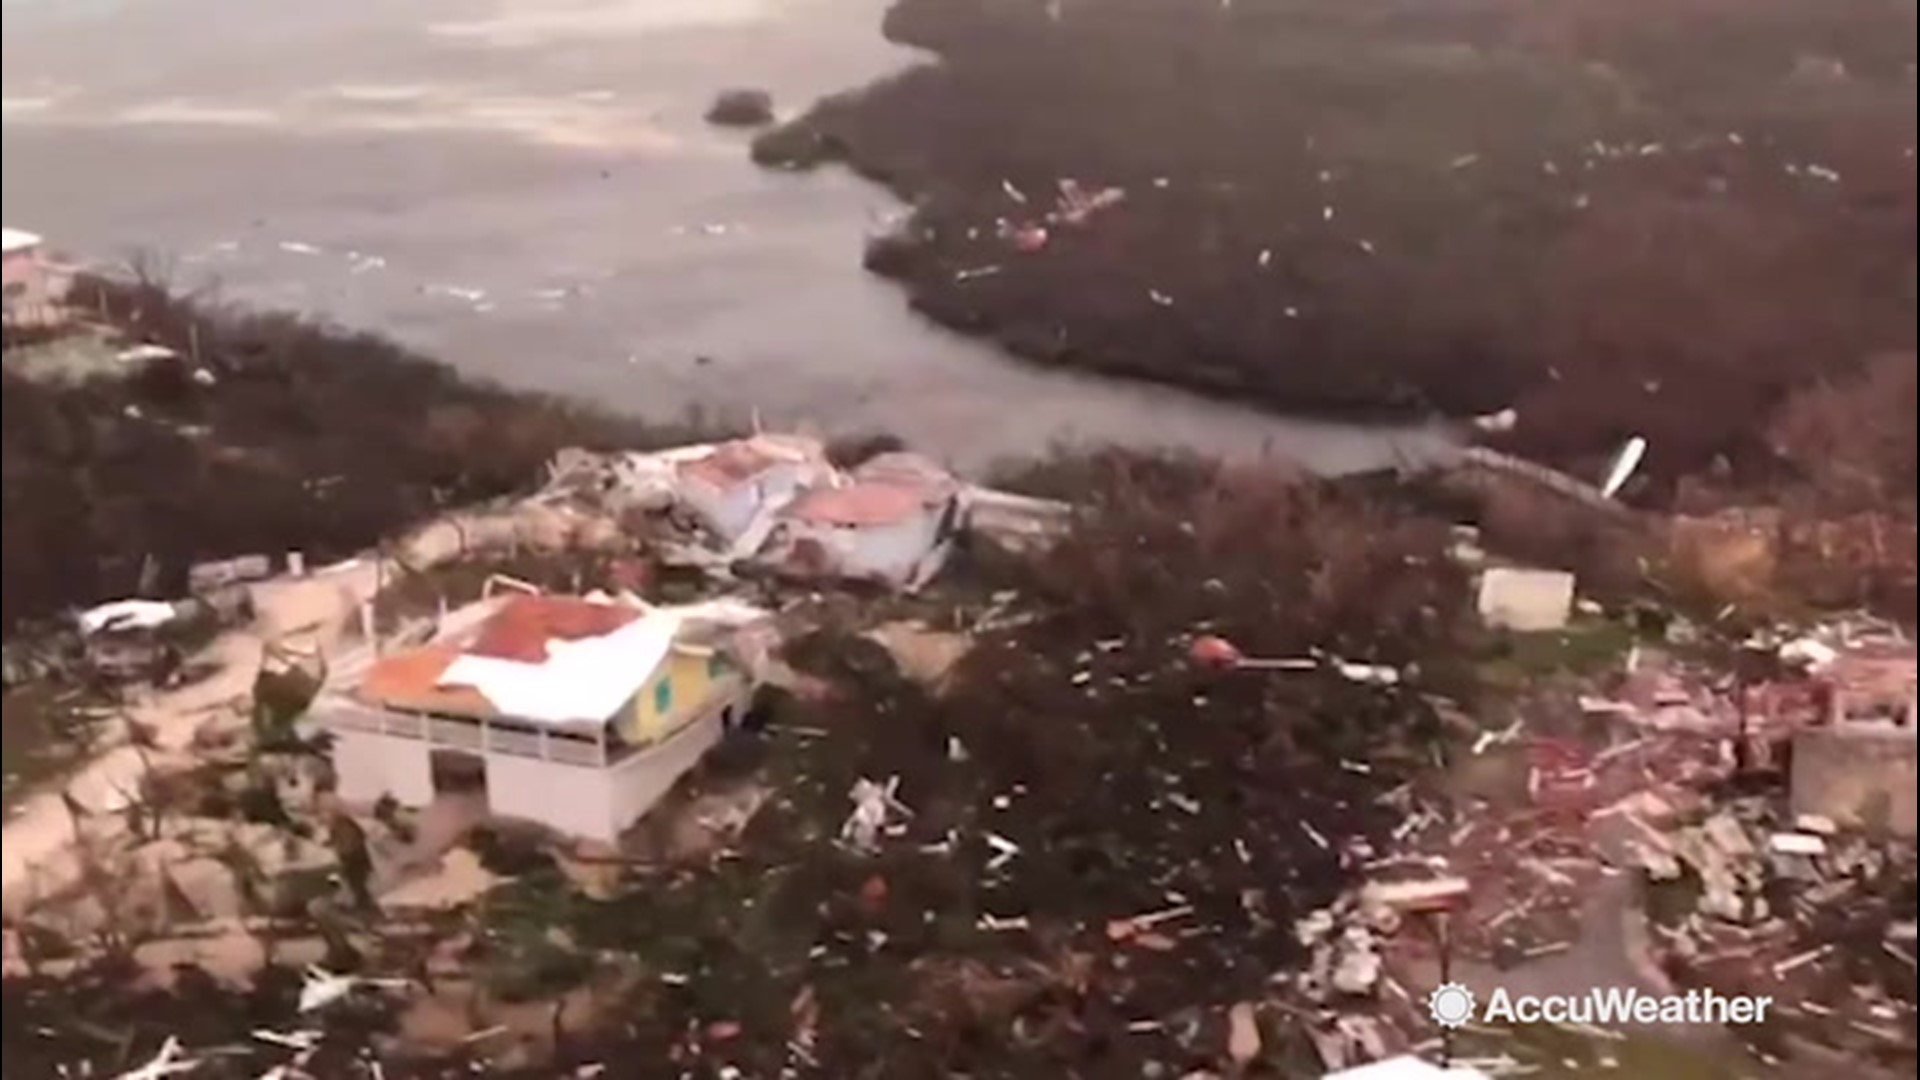 AccuWeather reporter Jonathan Petramala is in Nassau, Bahamas where he took an aerial look of the widespread devastation left behind by Hurricane Dorian on Sept. 3.